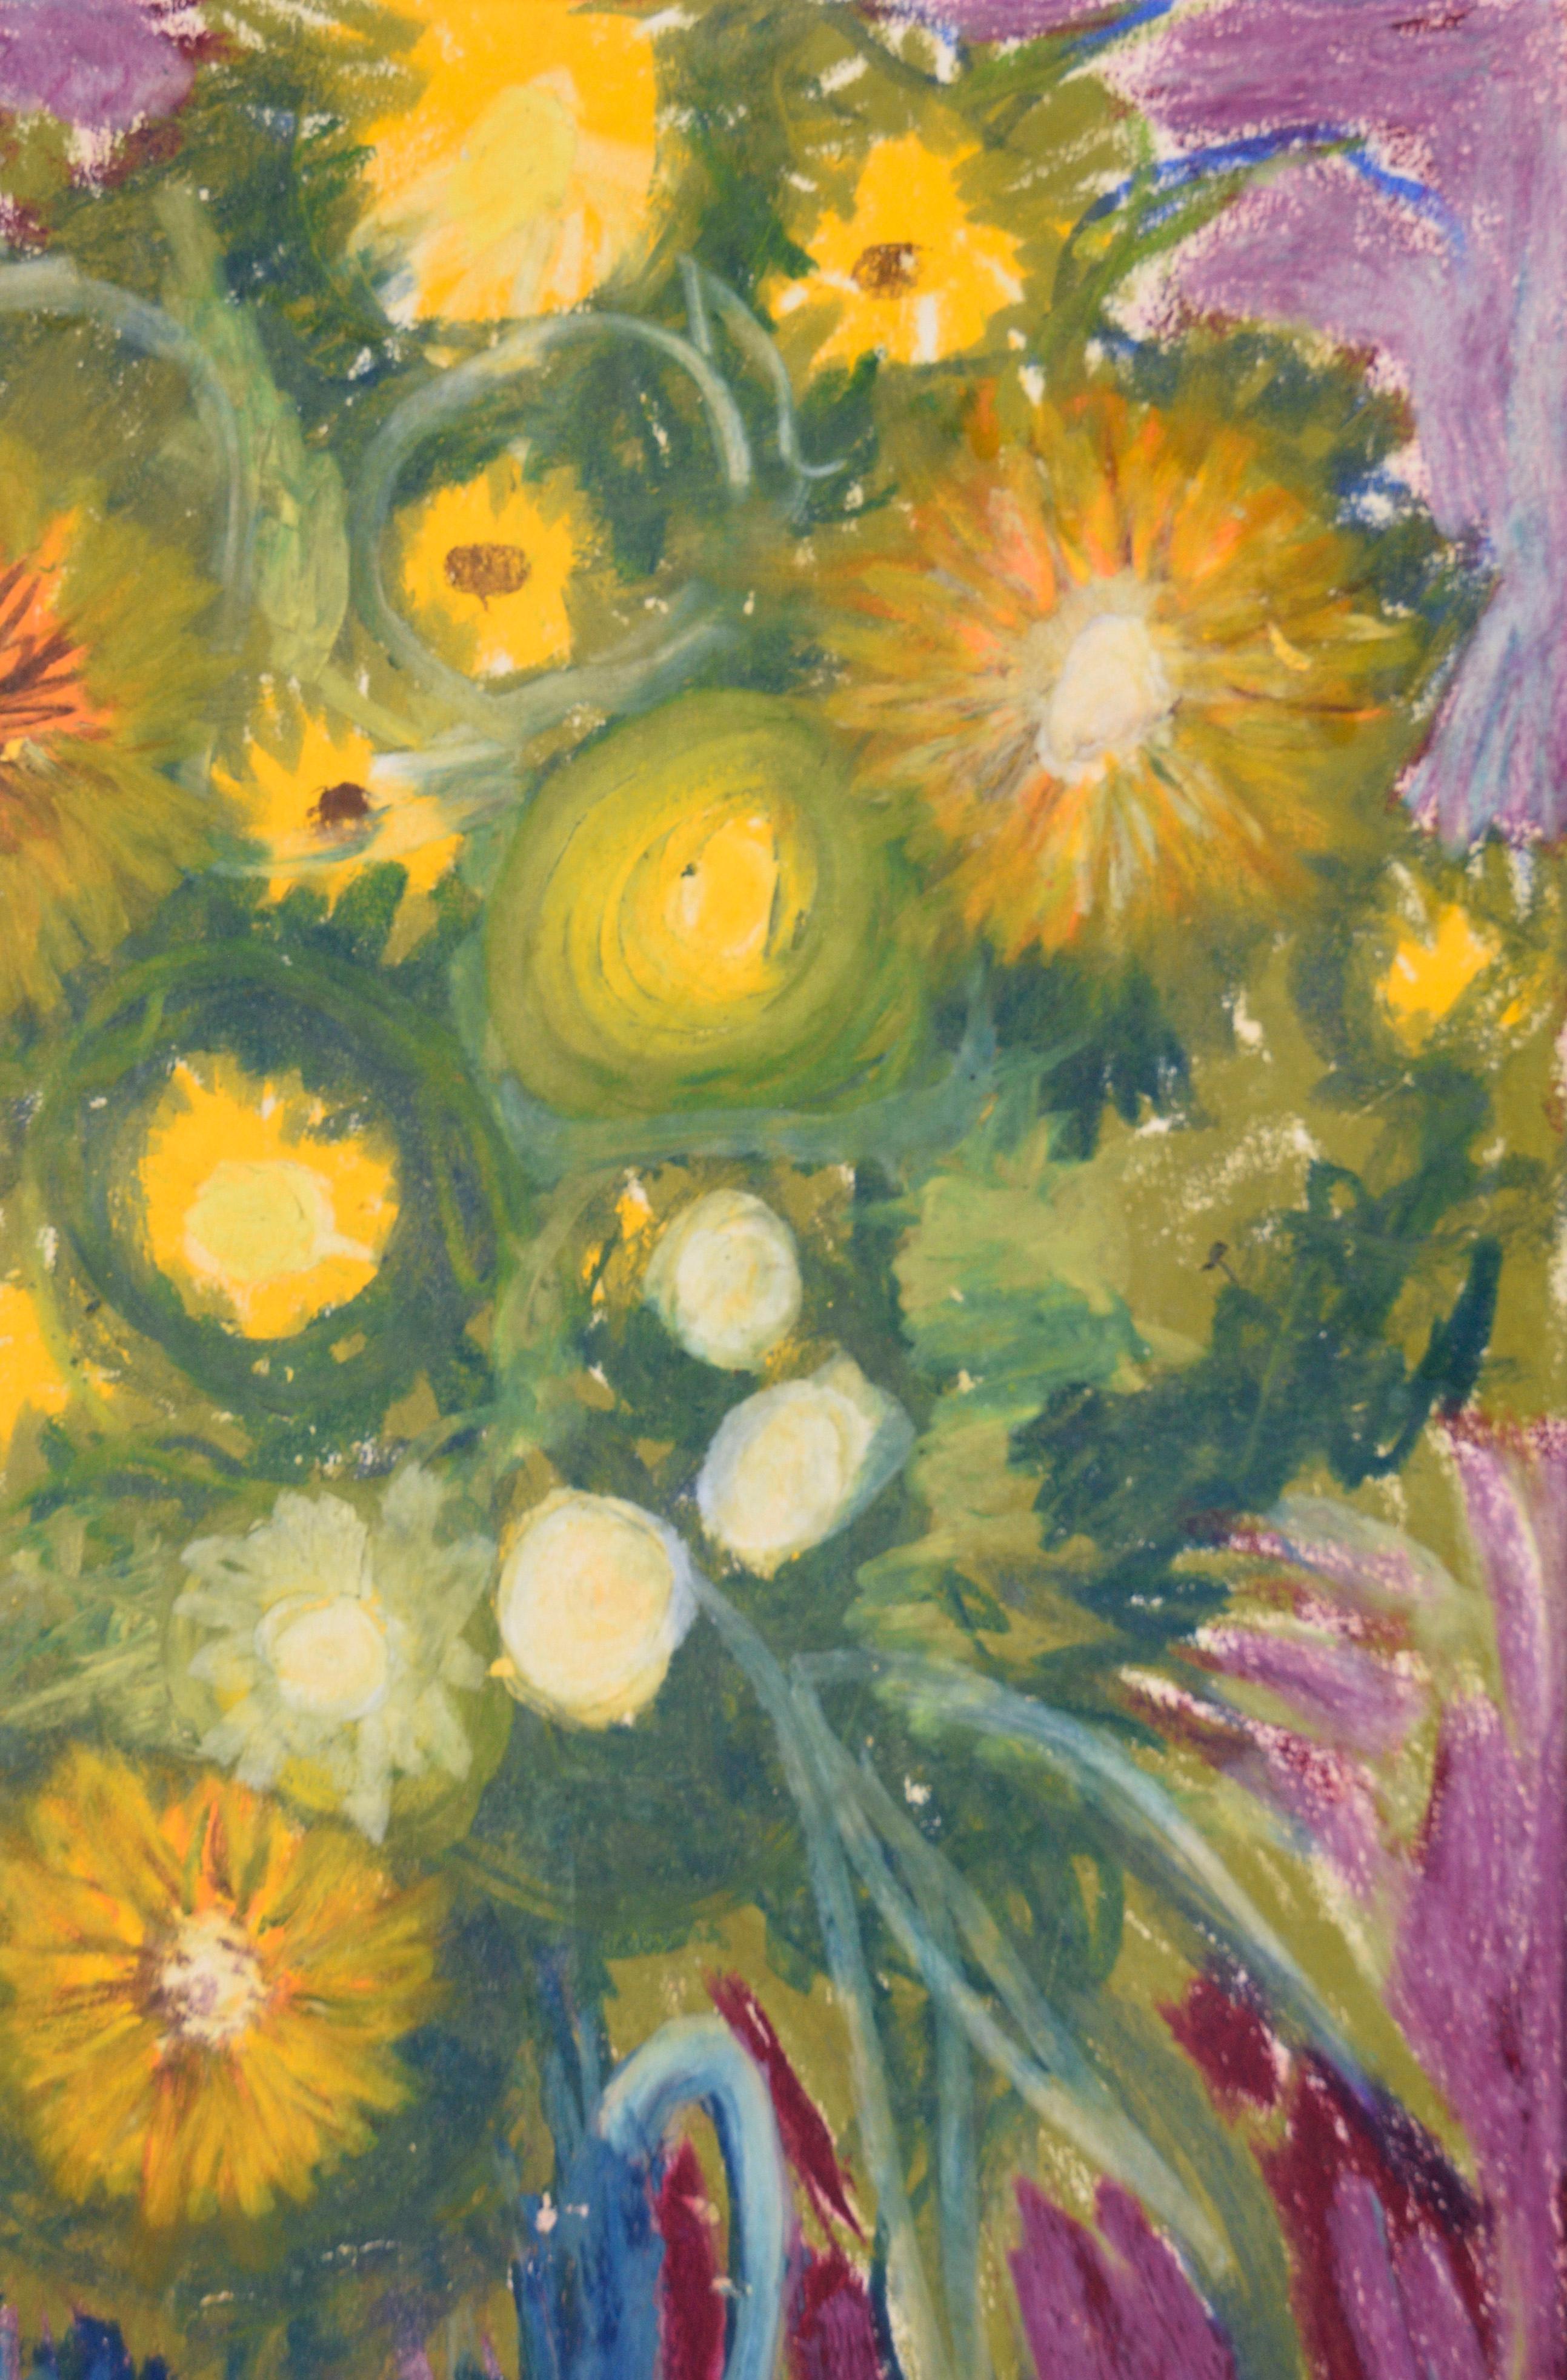 Daisies and Sunflowers - Still Life Oil Pastel on Paper

This fun, quirky oil pastel by a David Mark (American, 20th C) features bright, abstract yellow and white flowers with contrasting greens and blues of foliage and a blue vase on a vivid